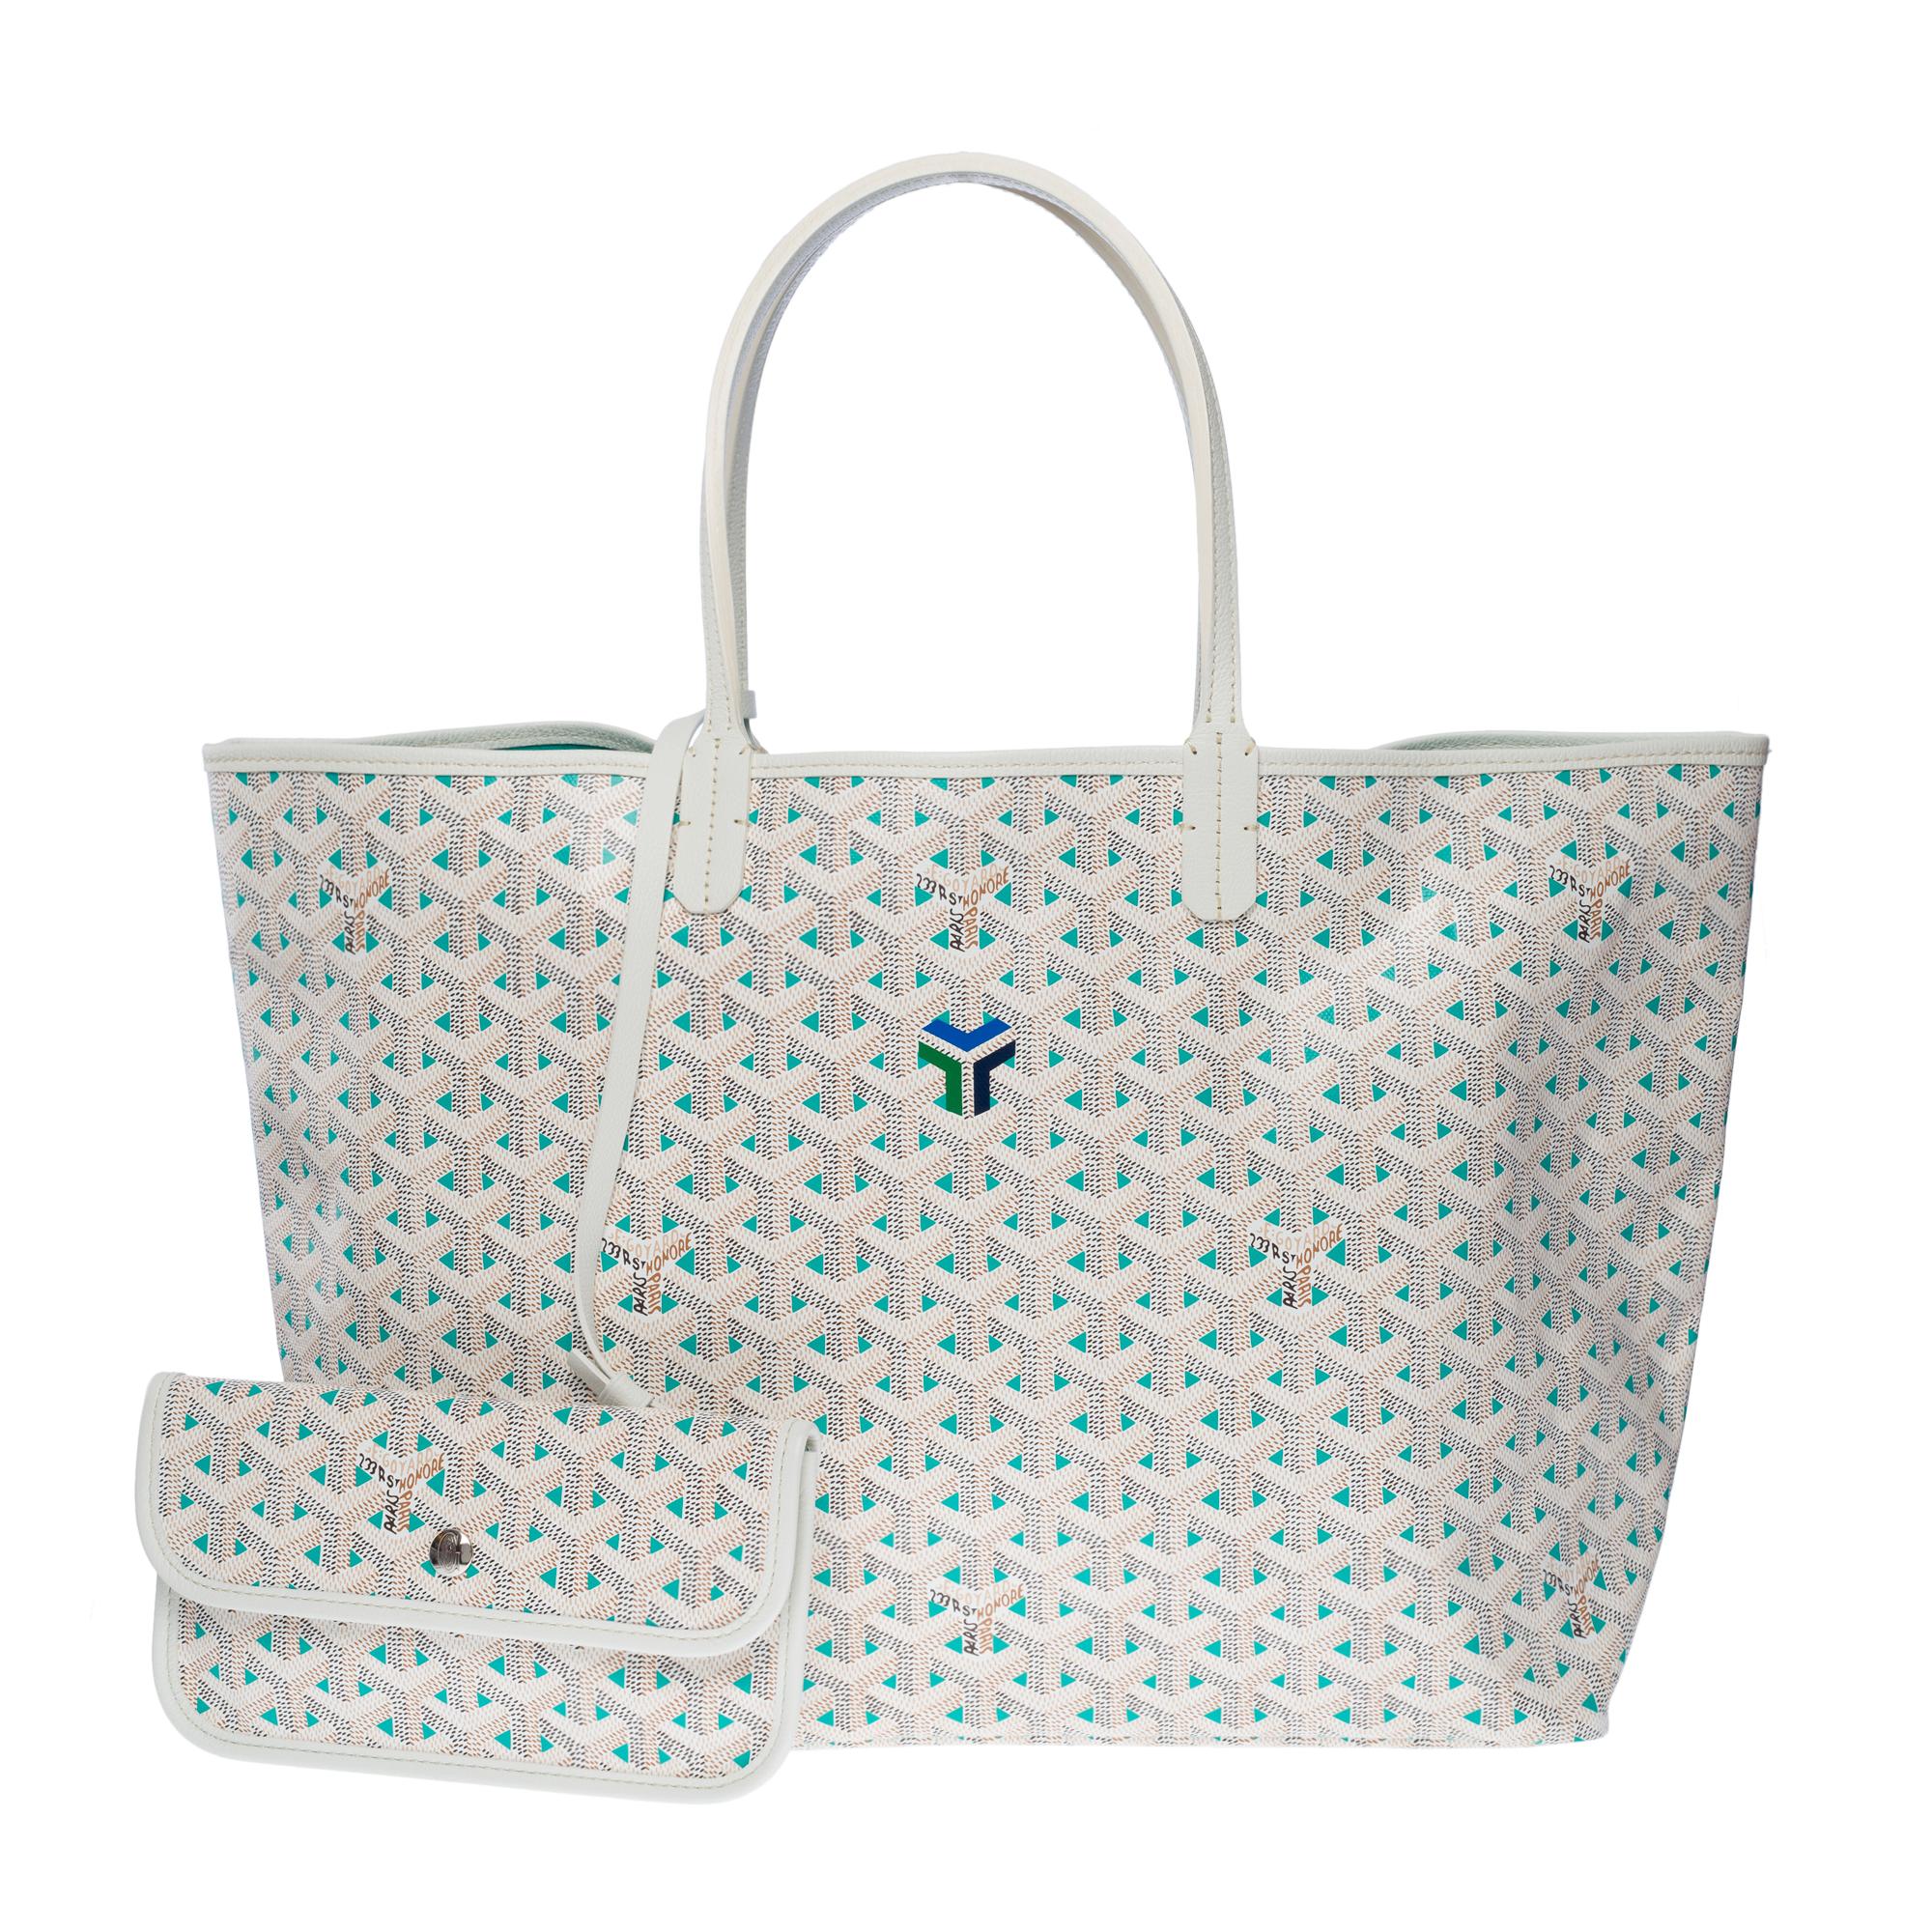 Bright Goyard Saint Louis Claire-Voie PM tote bag in white Goyardine canvas and white chevroches calf leather, silver metal hardware, double handle in white leather for a hand or shoulder. Green canvas inner lining, 1 removable matching